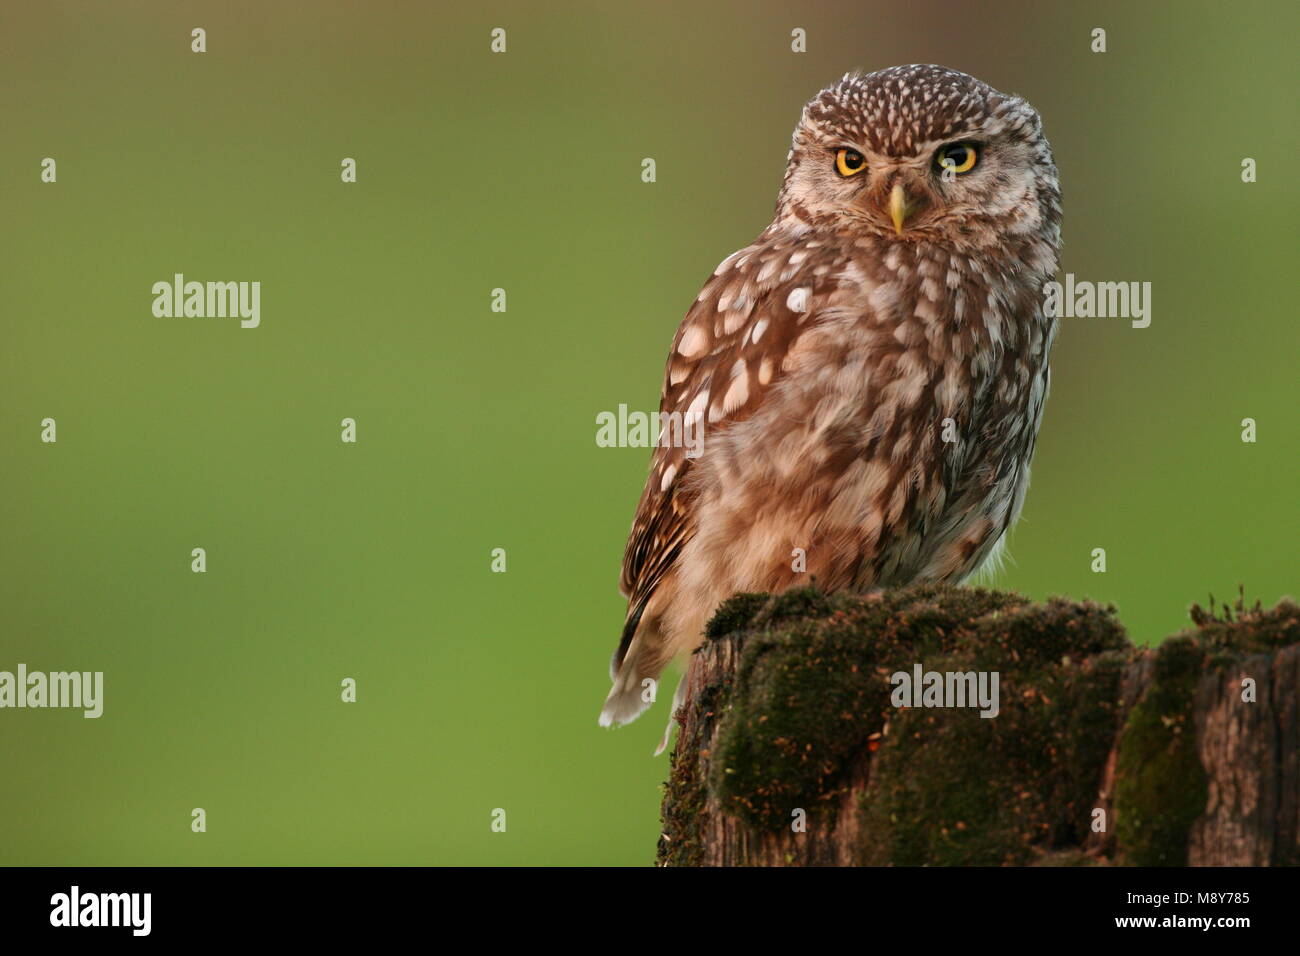 Little Owl perched on pole Netherlands, Steenuil zittend op paal Nederland Stock Photo